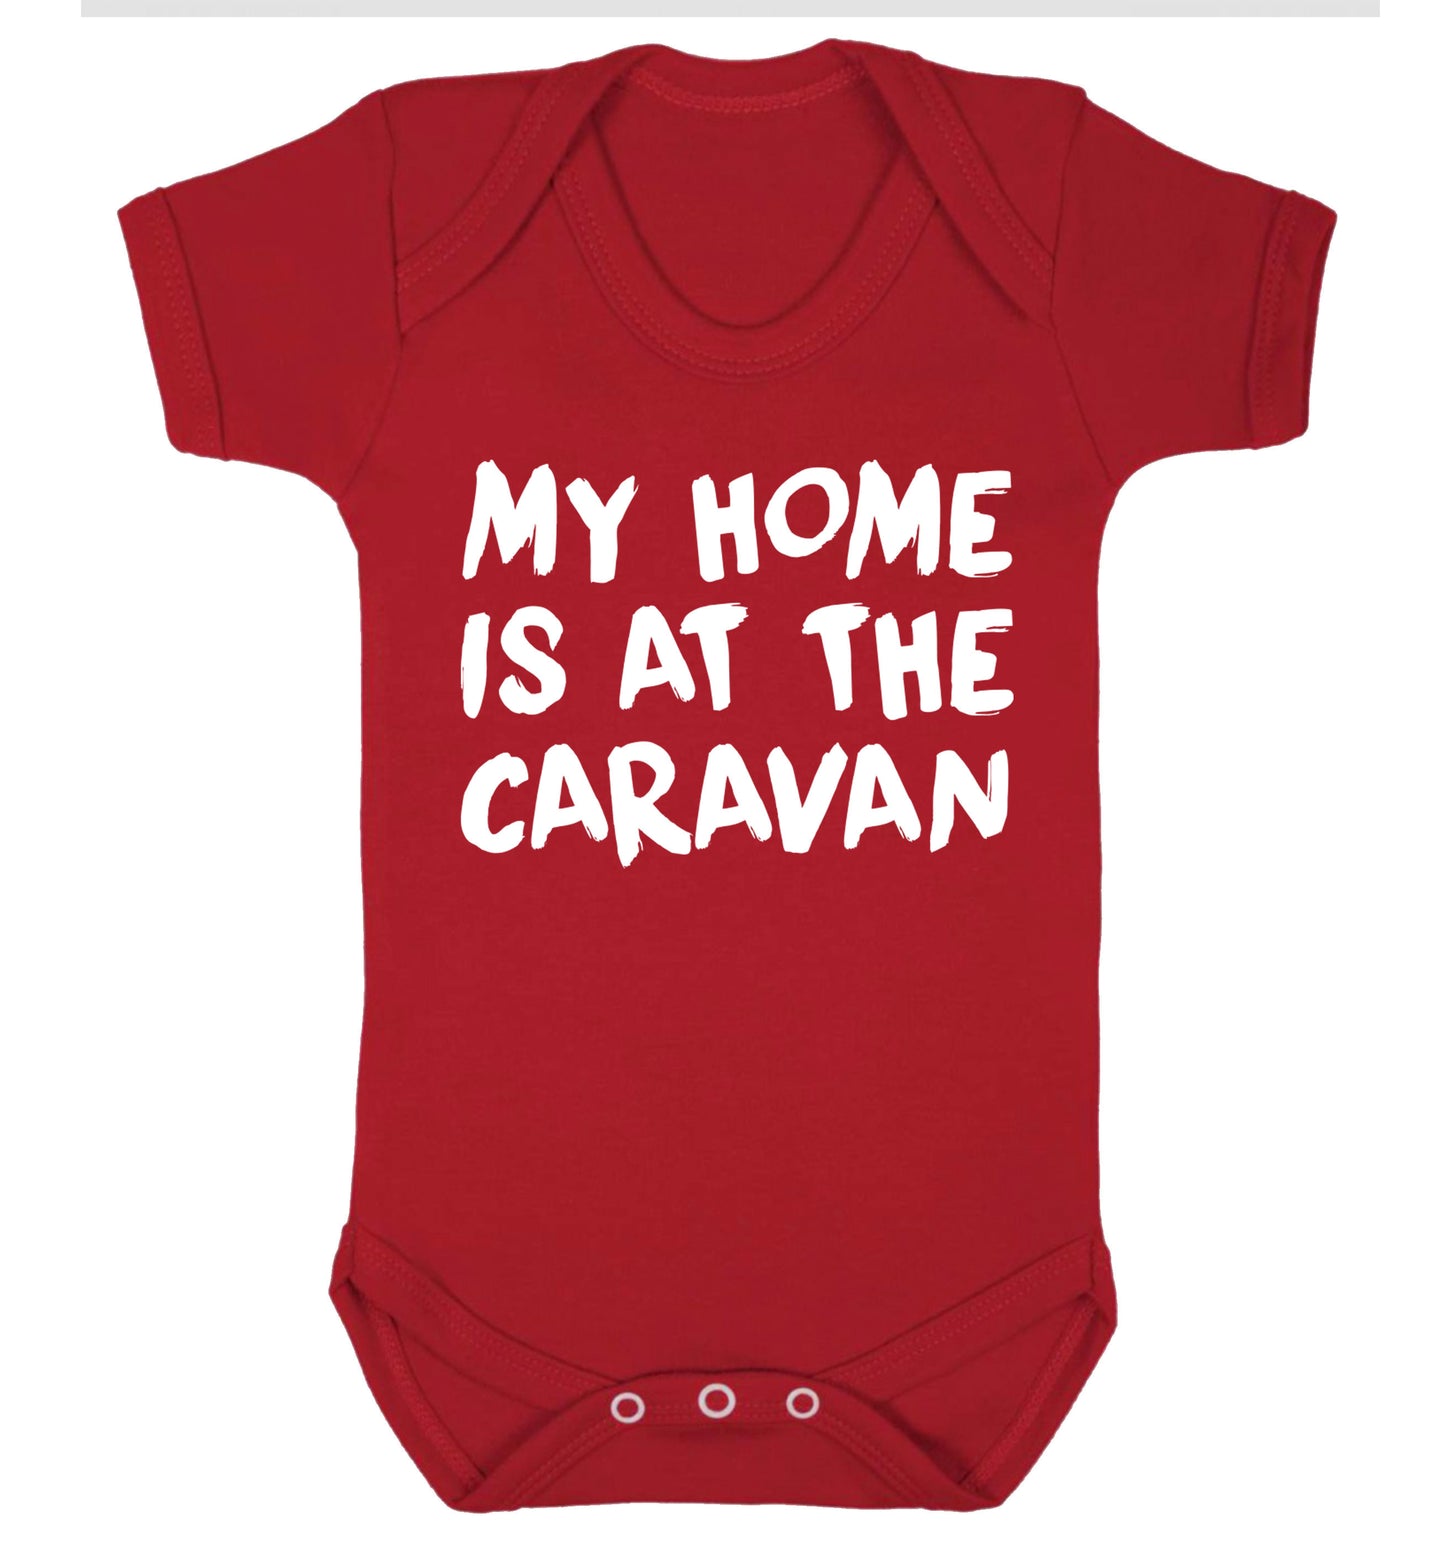 My home is at the caravan Baby Vest red 18-24 months